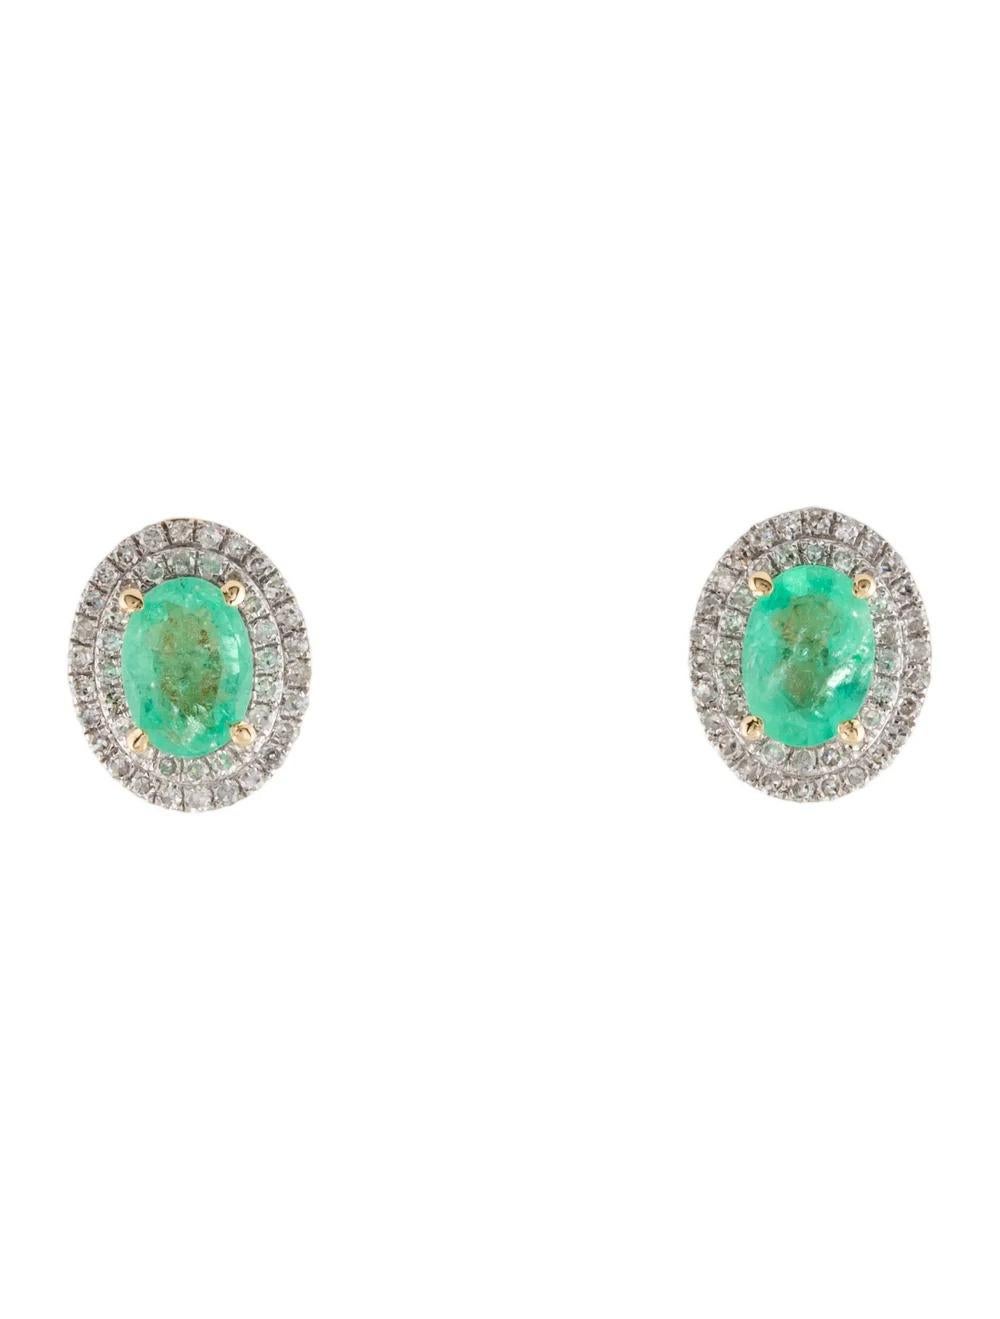 Elevate your elegance with these exquisite Rhodium-Plated & 14K Yellow Gold Stud Earrings, featuring captivating 1.75 Carat Faceted Oval Emeralds and 0.92 Carats of shimmering Diamonds.

Specifications:

* Metal Type: 14K Yellow Gold,